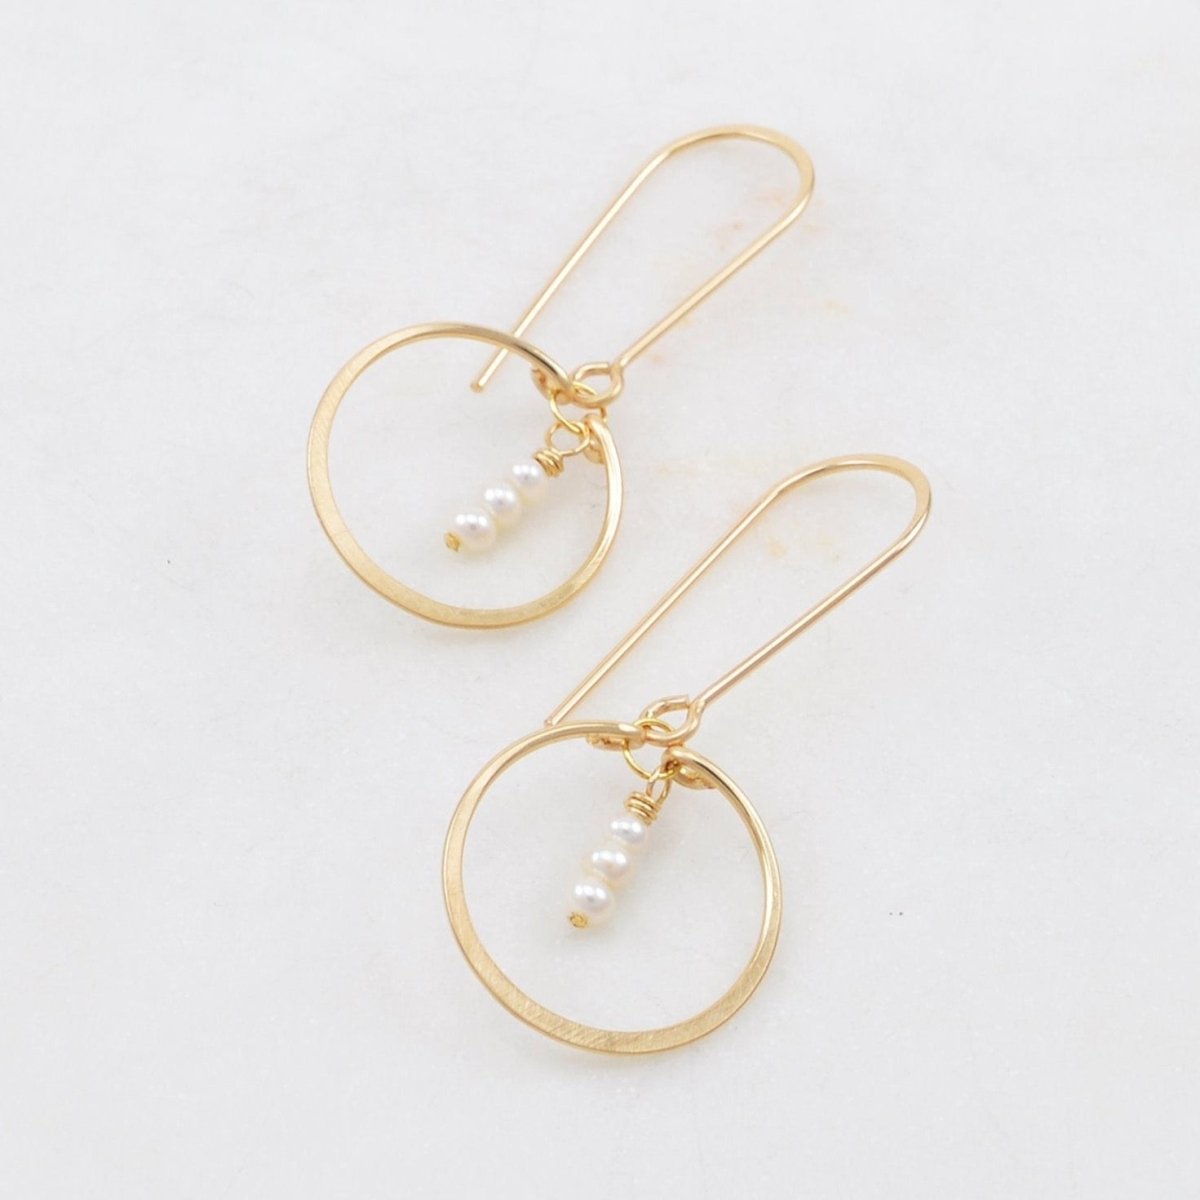 A curved gold-fill ear wire holds a delicate gold-fill hammered circle. Three small freshwater pearls hang in the center of the circle. The Petite Circle Gem Drop Earrings with Fresh Water Pearls are designed and handcrafted by Amy Olson in Portland, Oregon.